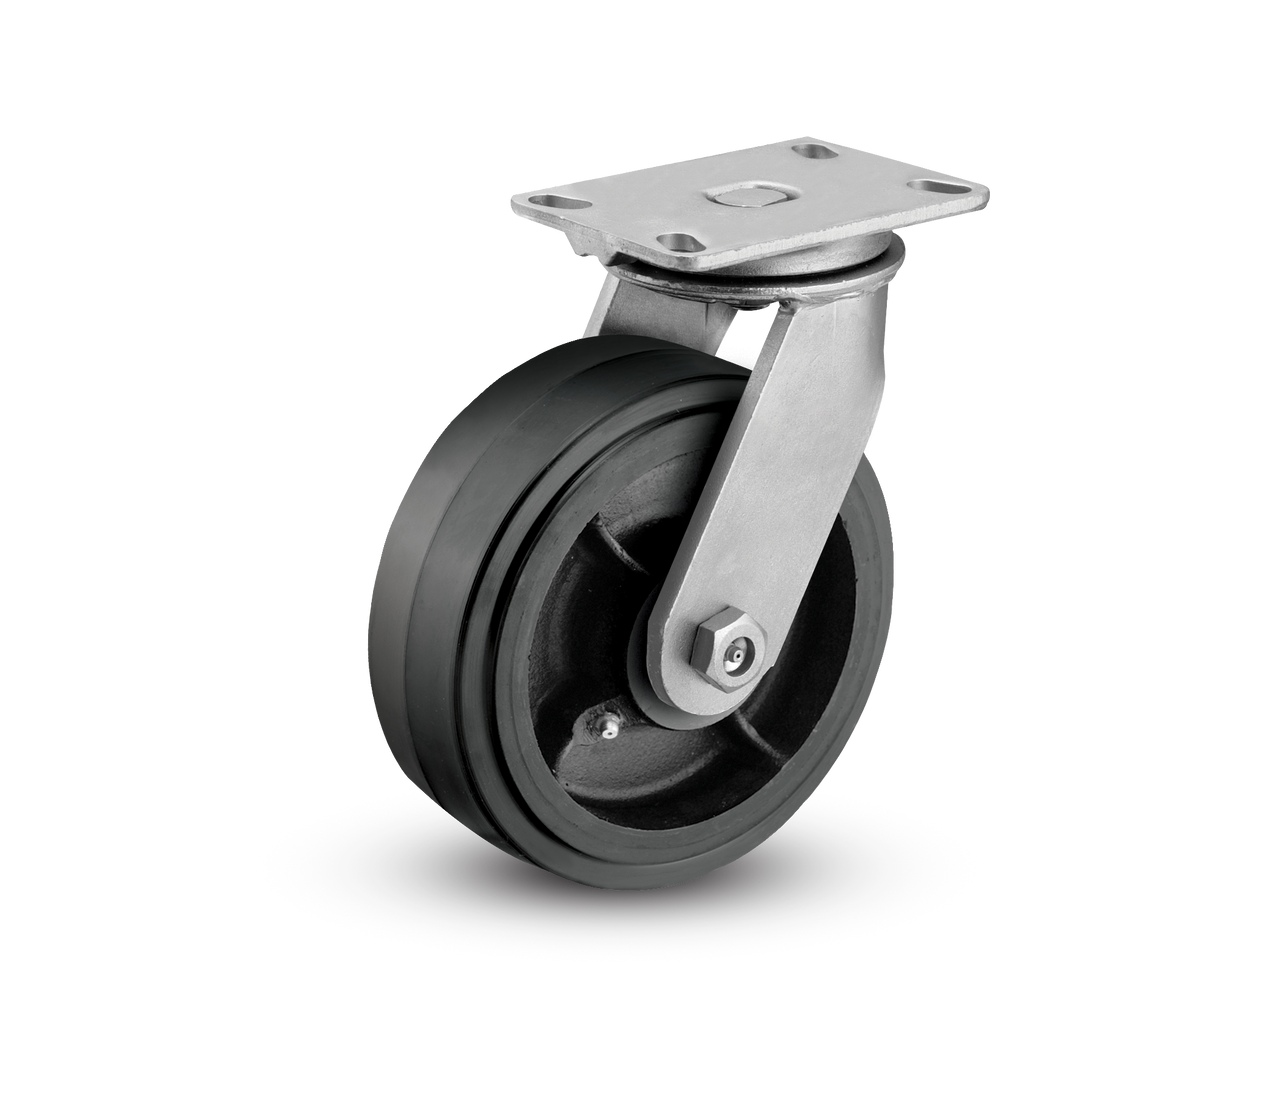 8" x 2" Mold On Rubber Swivel Caster